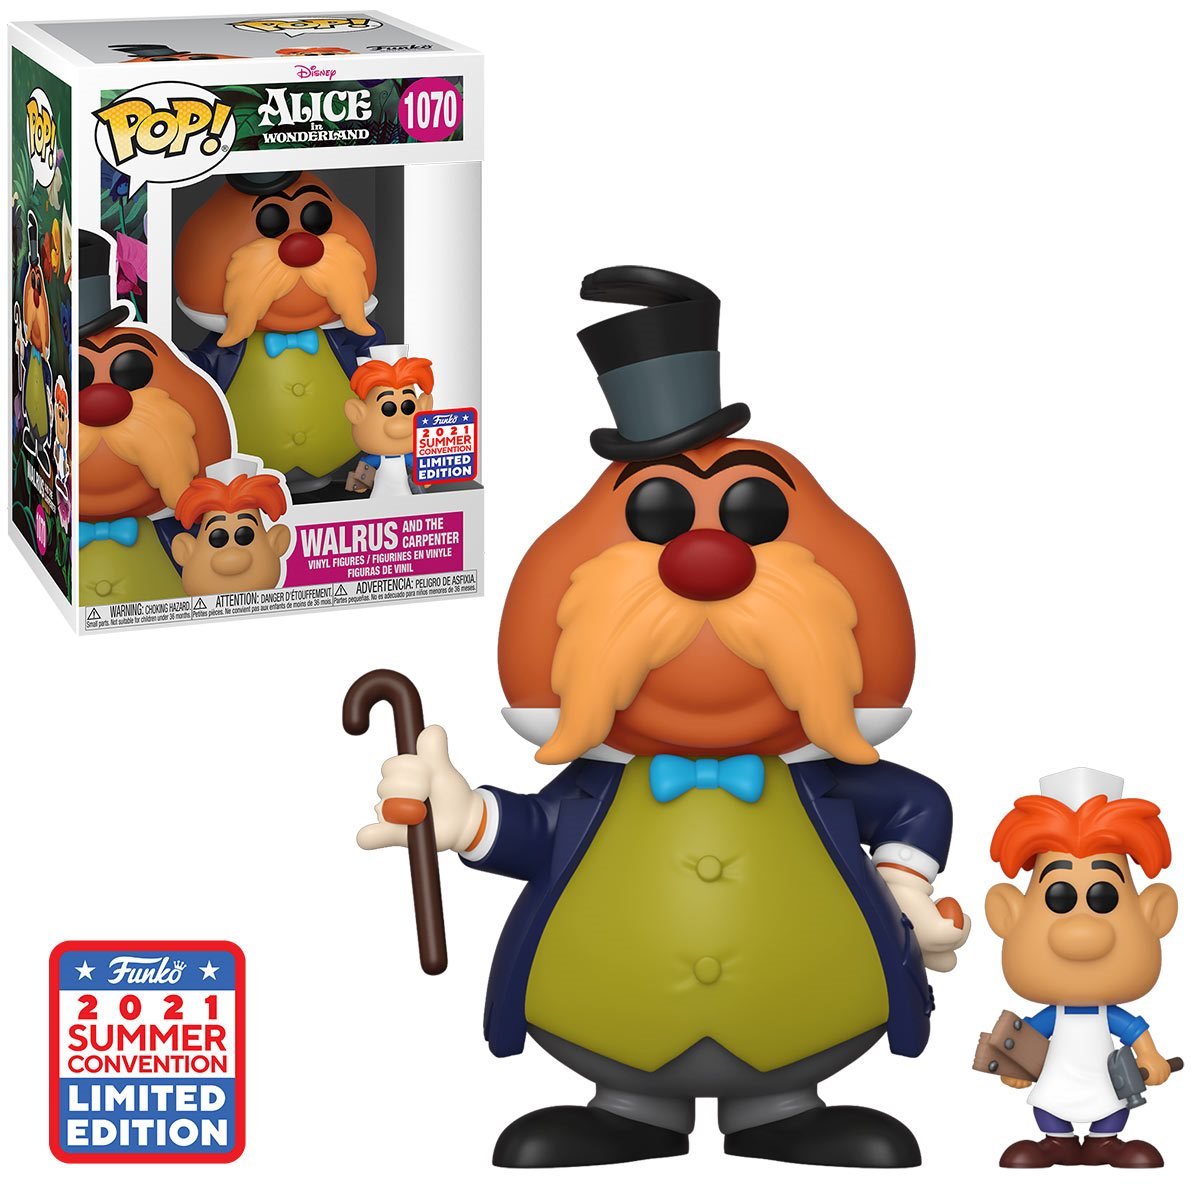 Alice in Wonderland Walrus and the Carpenter Pop Vinyl Figure and Buddy -  2021 Convention Exclusive